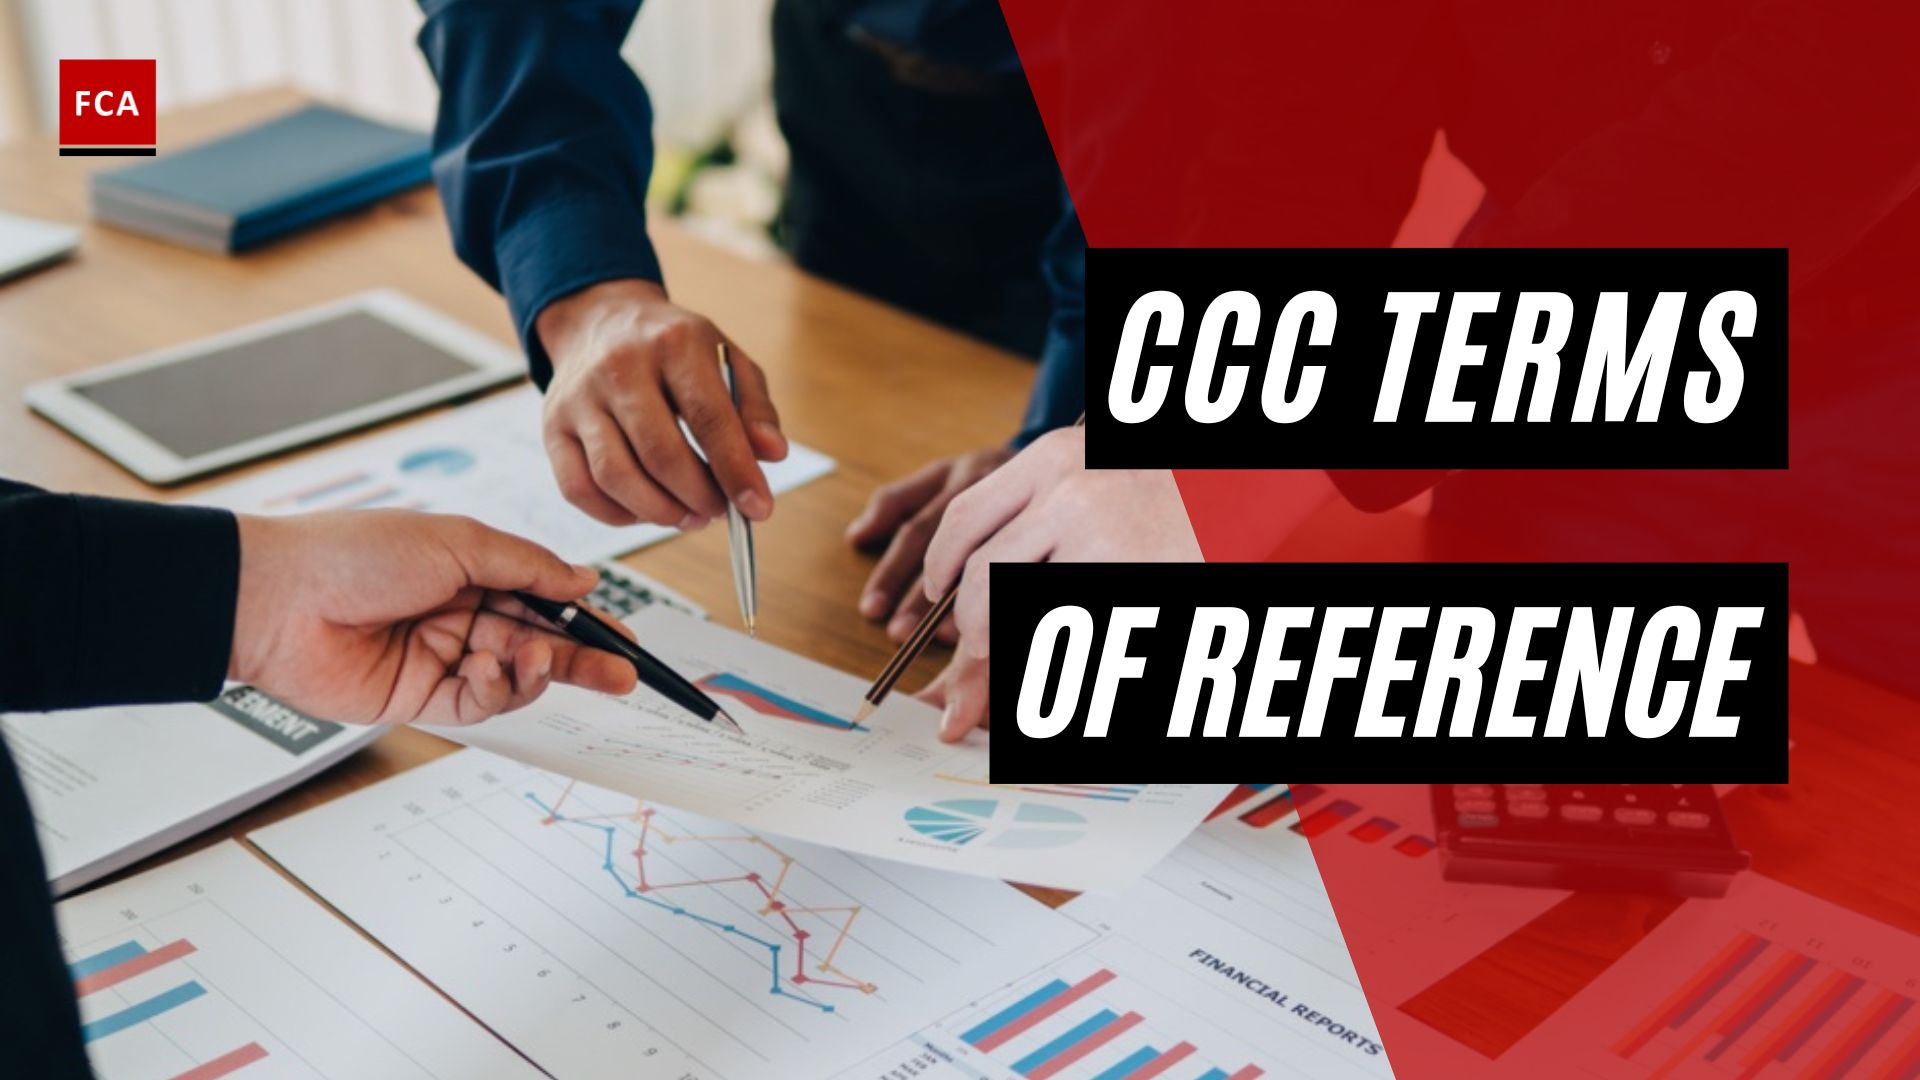 Ccc Terms Of Reference